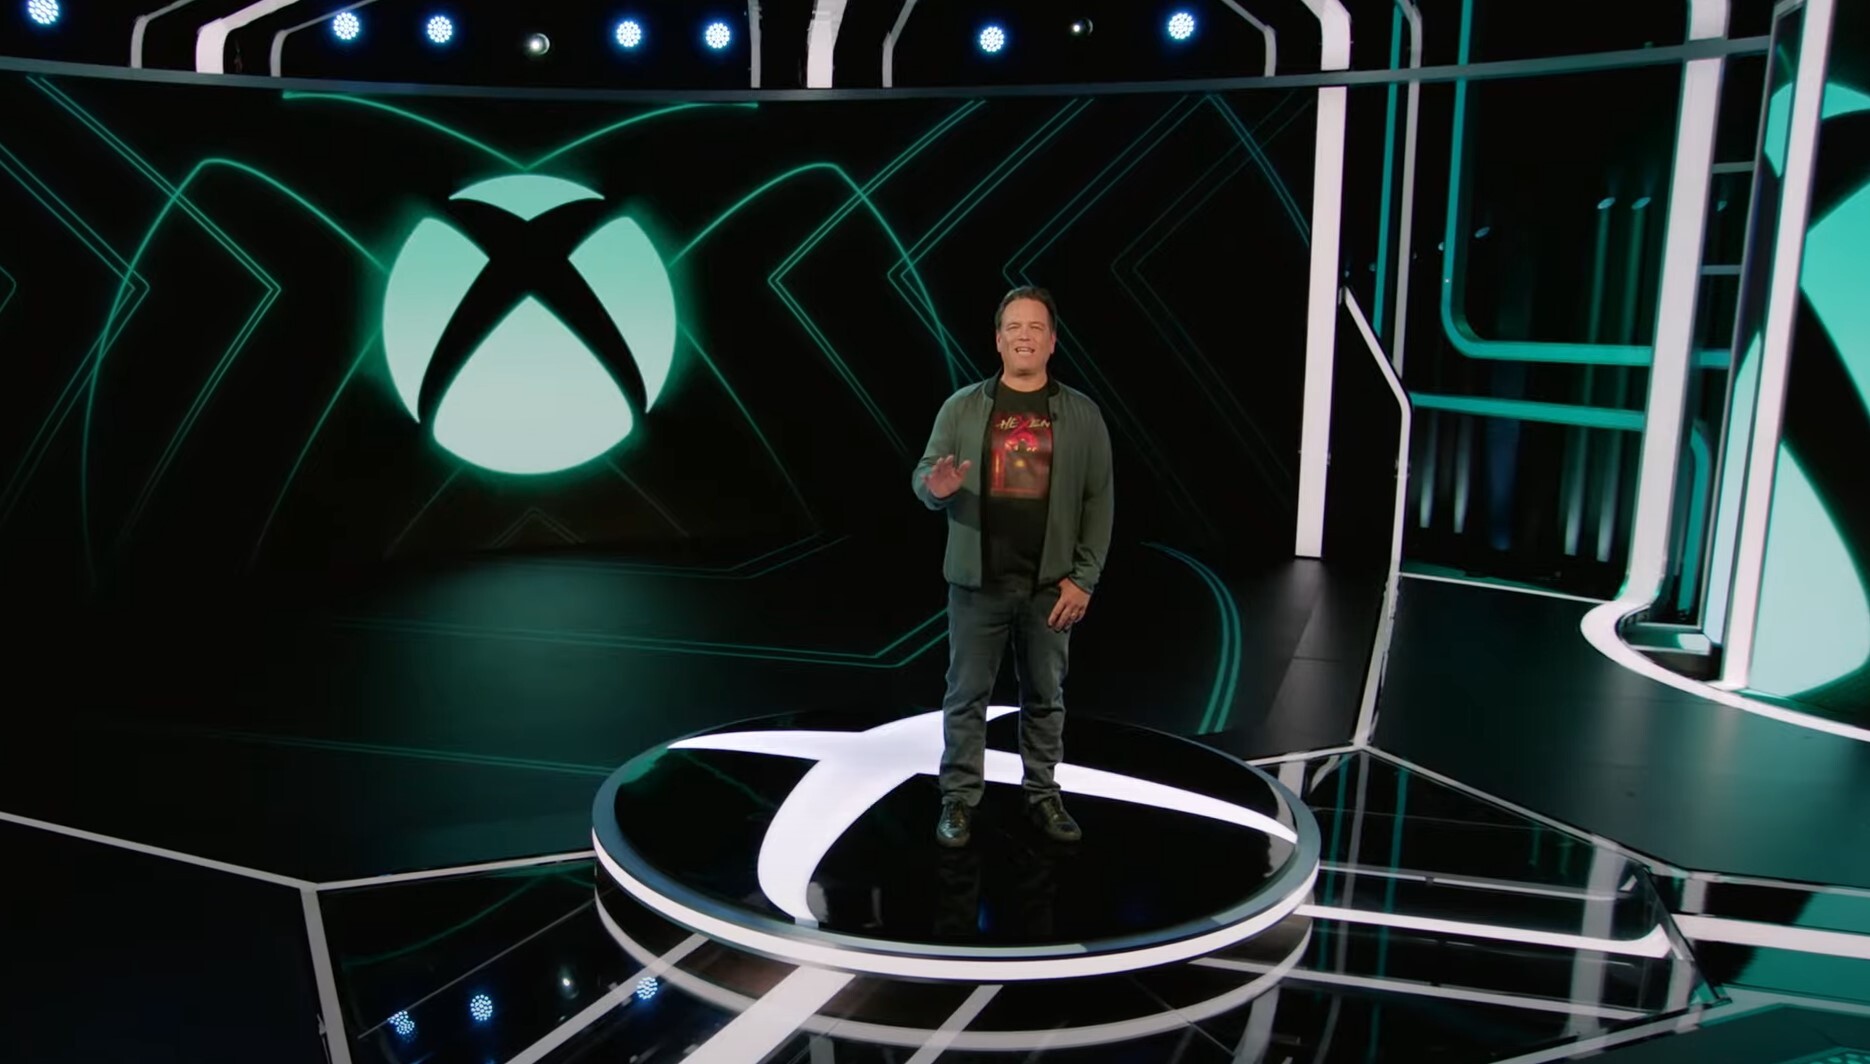 Xbox Leader Phil Spencer (accidentally) leaks image of 'Keystone' streaming  console